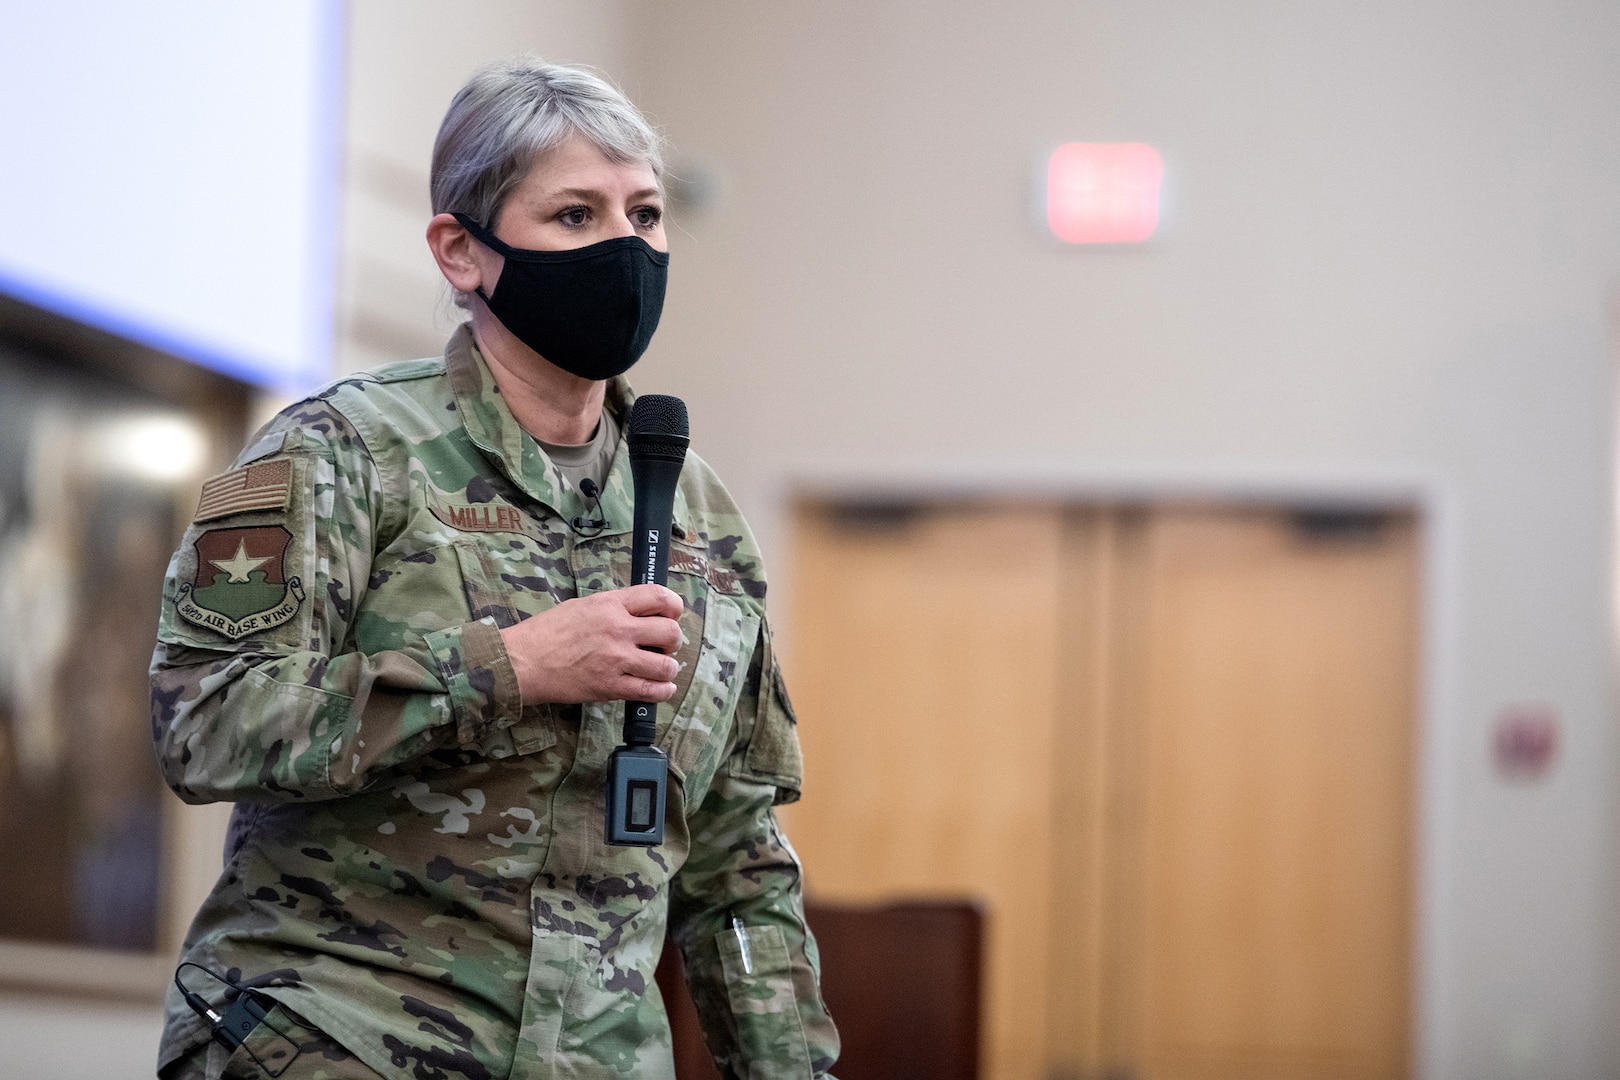 U.S. Air Force Brig. General Caroline M. Miller, 502d Air Base Wing and Joint Base San Antonio commander, addresses the audience during a commander’s call Sept. 28, 2020, at Joint Base San Antonio-Lackland, Texas.